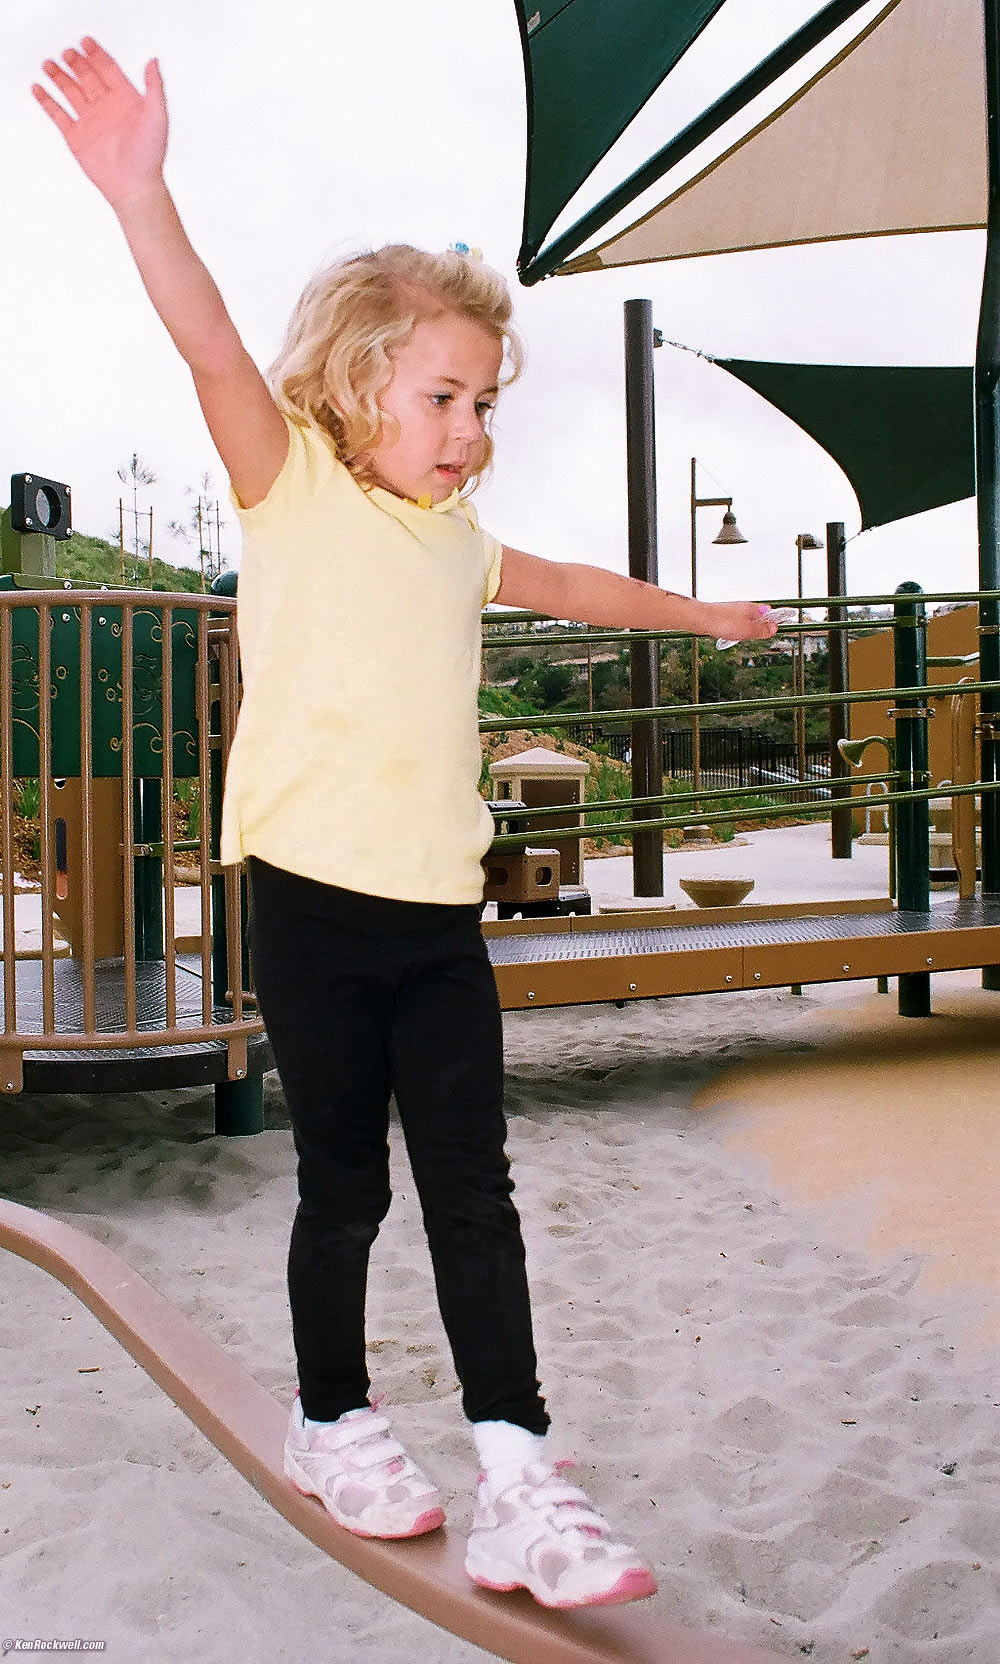 Katie on the balance bar at the new park. 